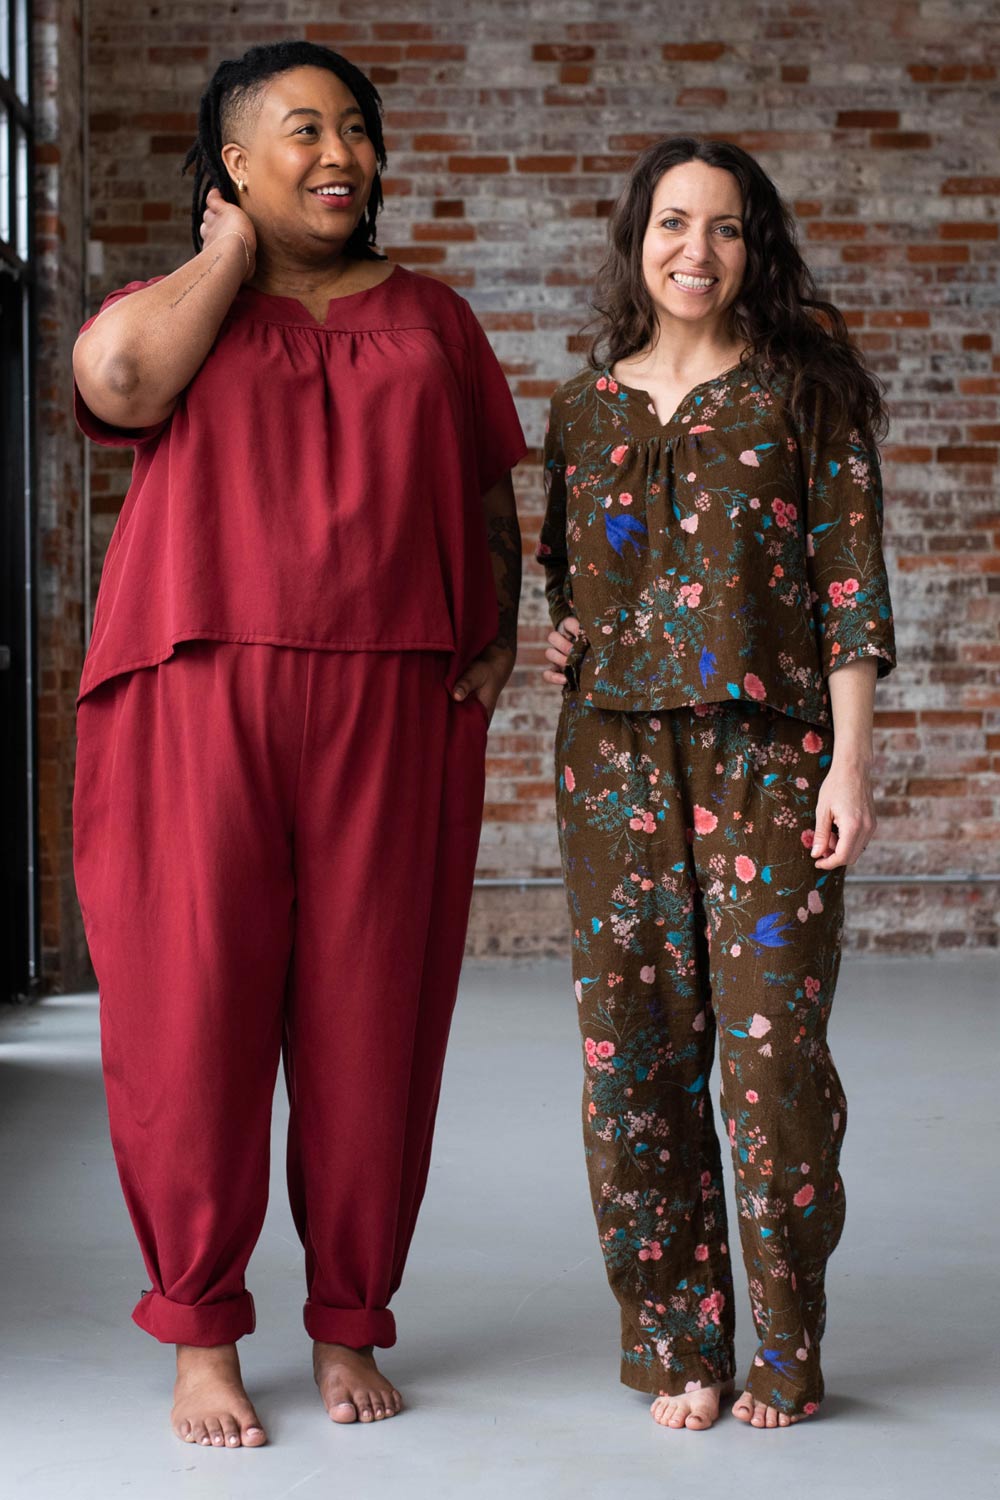 Meg and Ashley wear their Nocturne Pajamas in front of a brick wall.